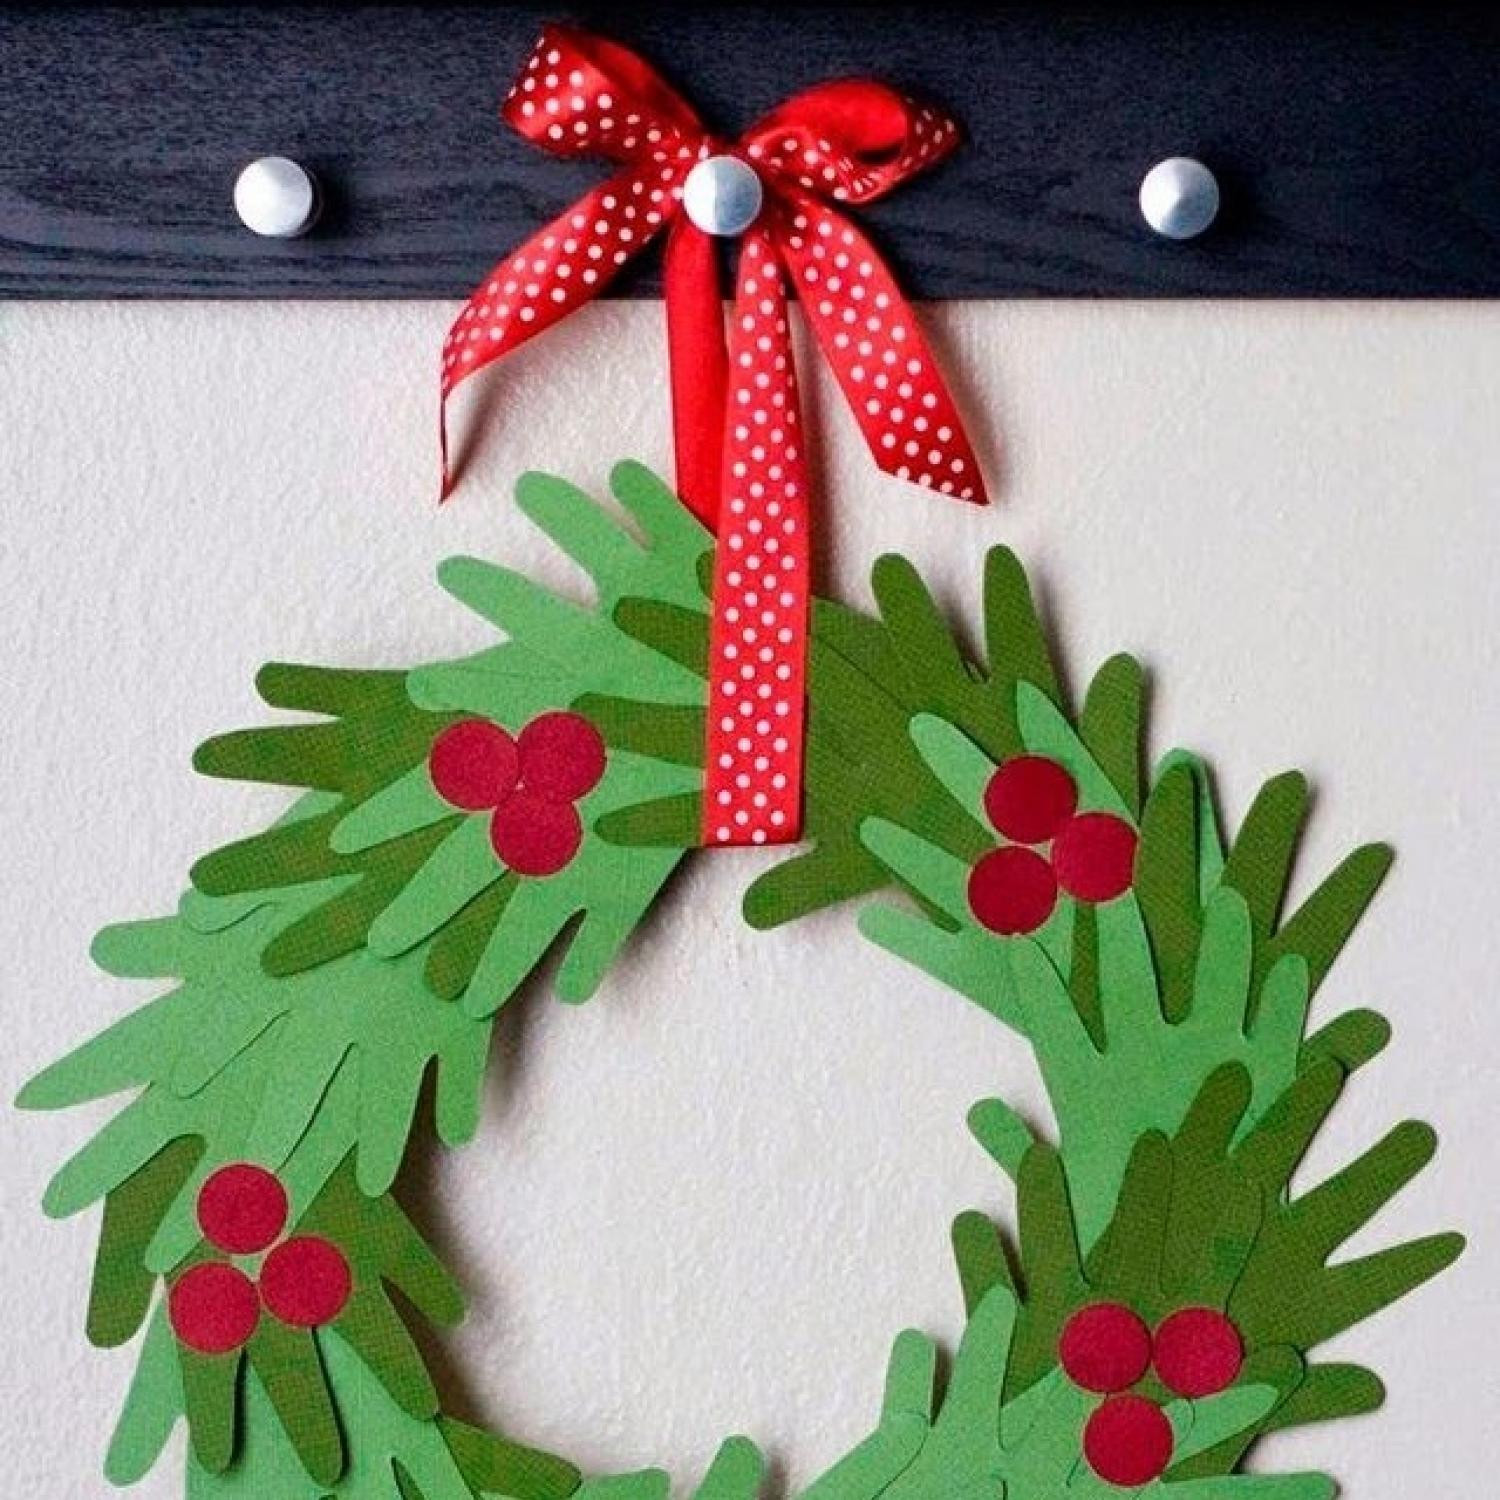 Easy Christmas Arts And Crafts
 10 Handprint Christmas Crafts for Kids